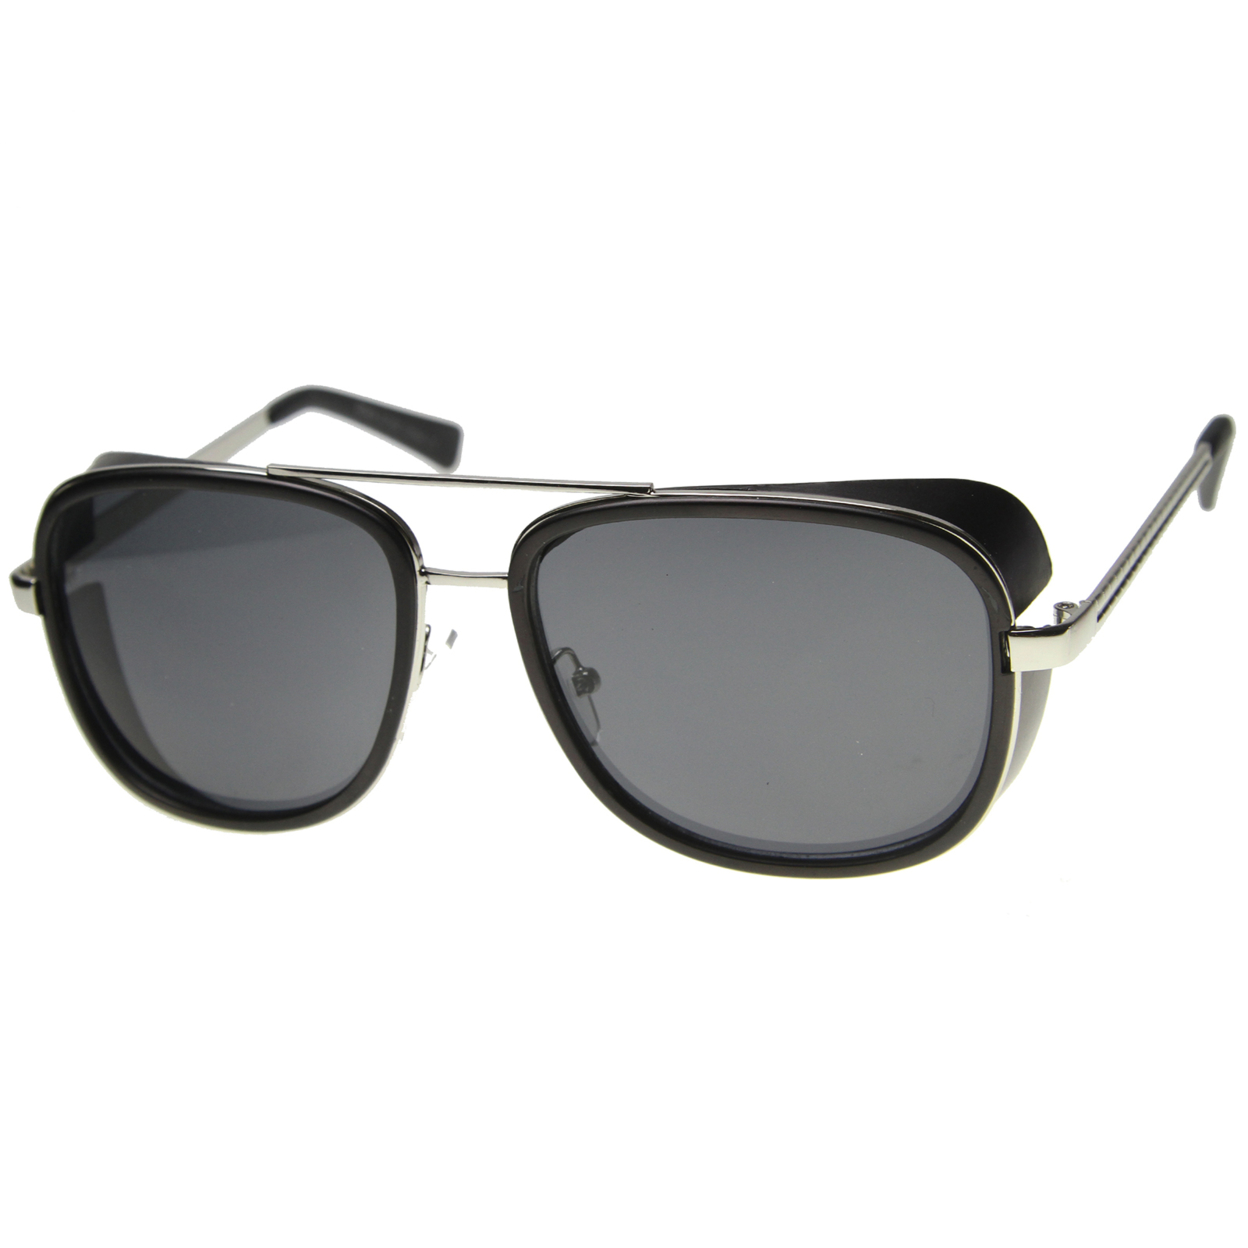 Unisex Aviator Sunglasses With UV400 Protected Mirrored Lens 9896 - Matte Black-Silver / Midnight